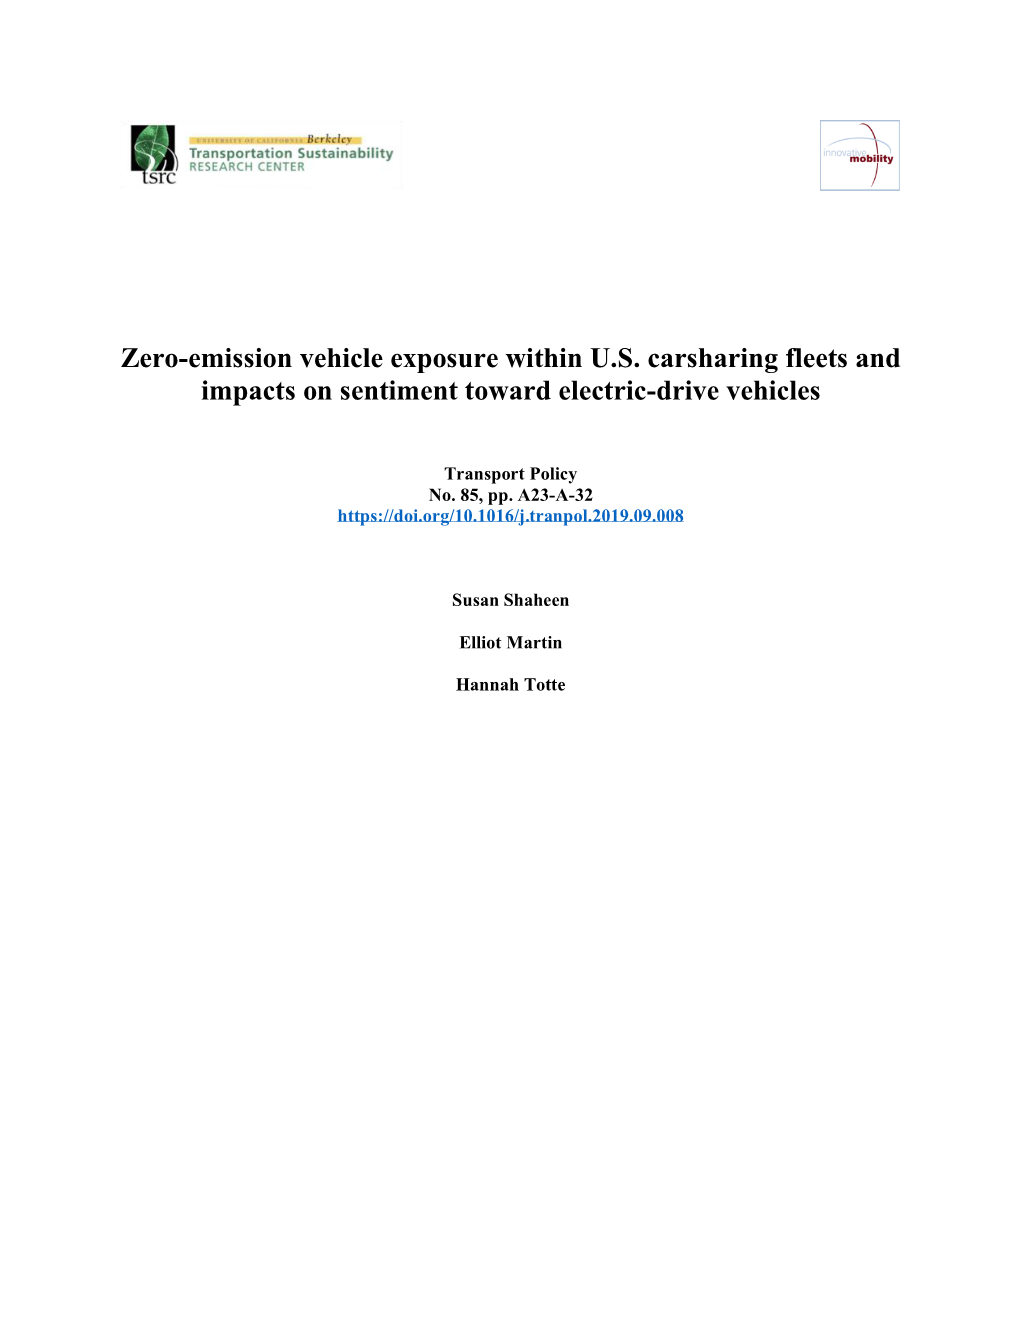 Zero-Emission Vehicle Exposure Within U.S. Carsharing Fleets and Impacts on Sentiment Toward Electric-Drive Vehicles